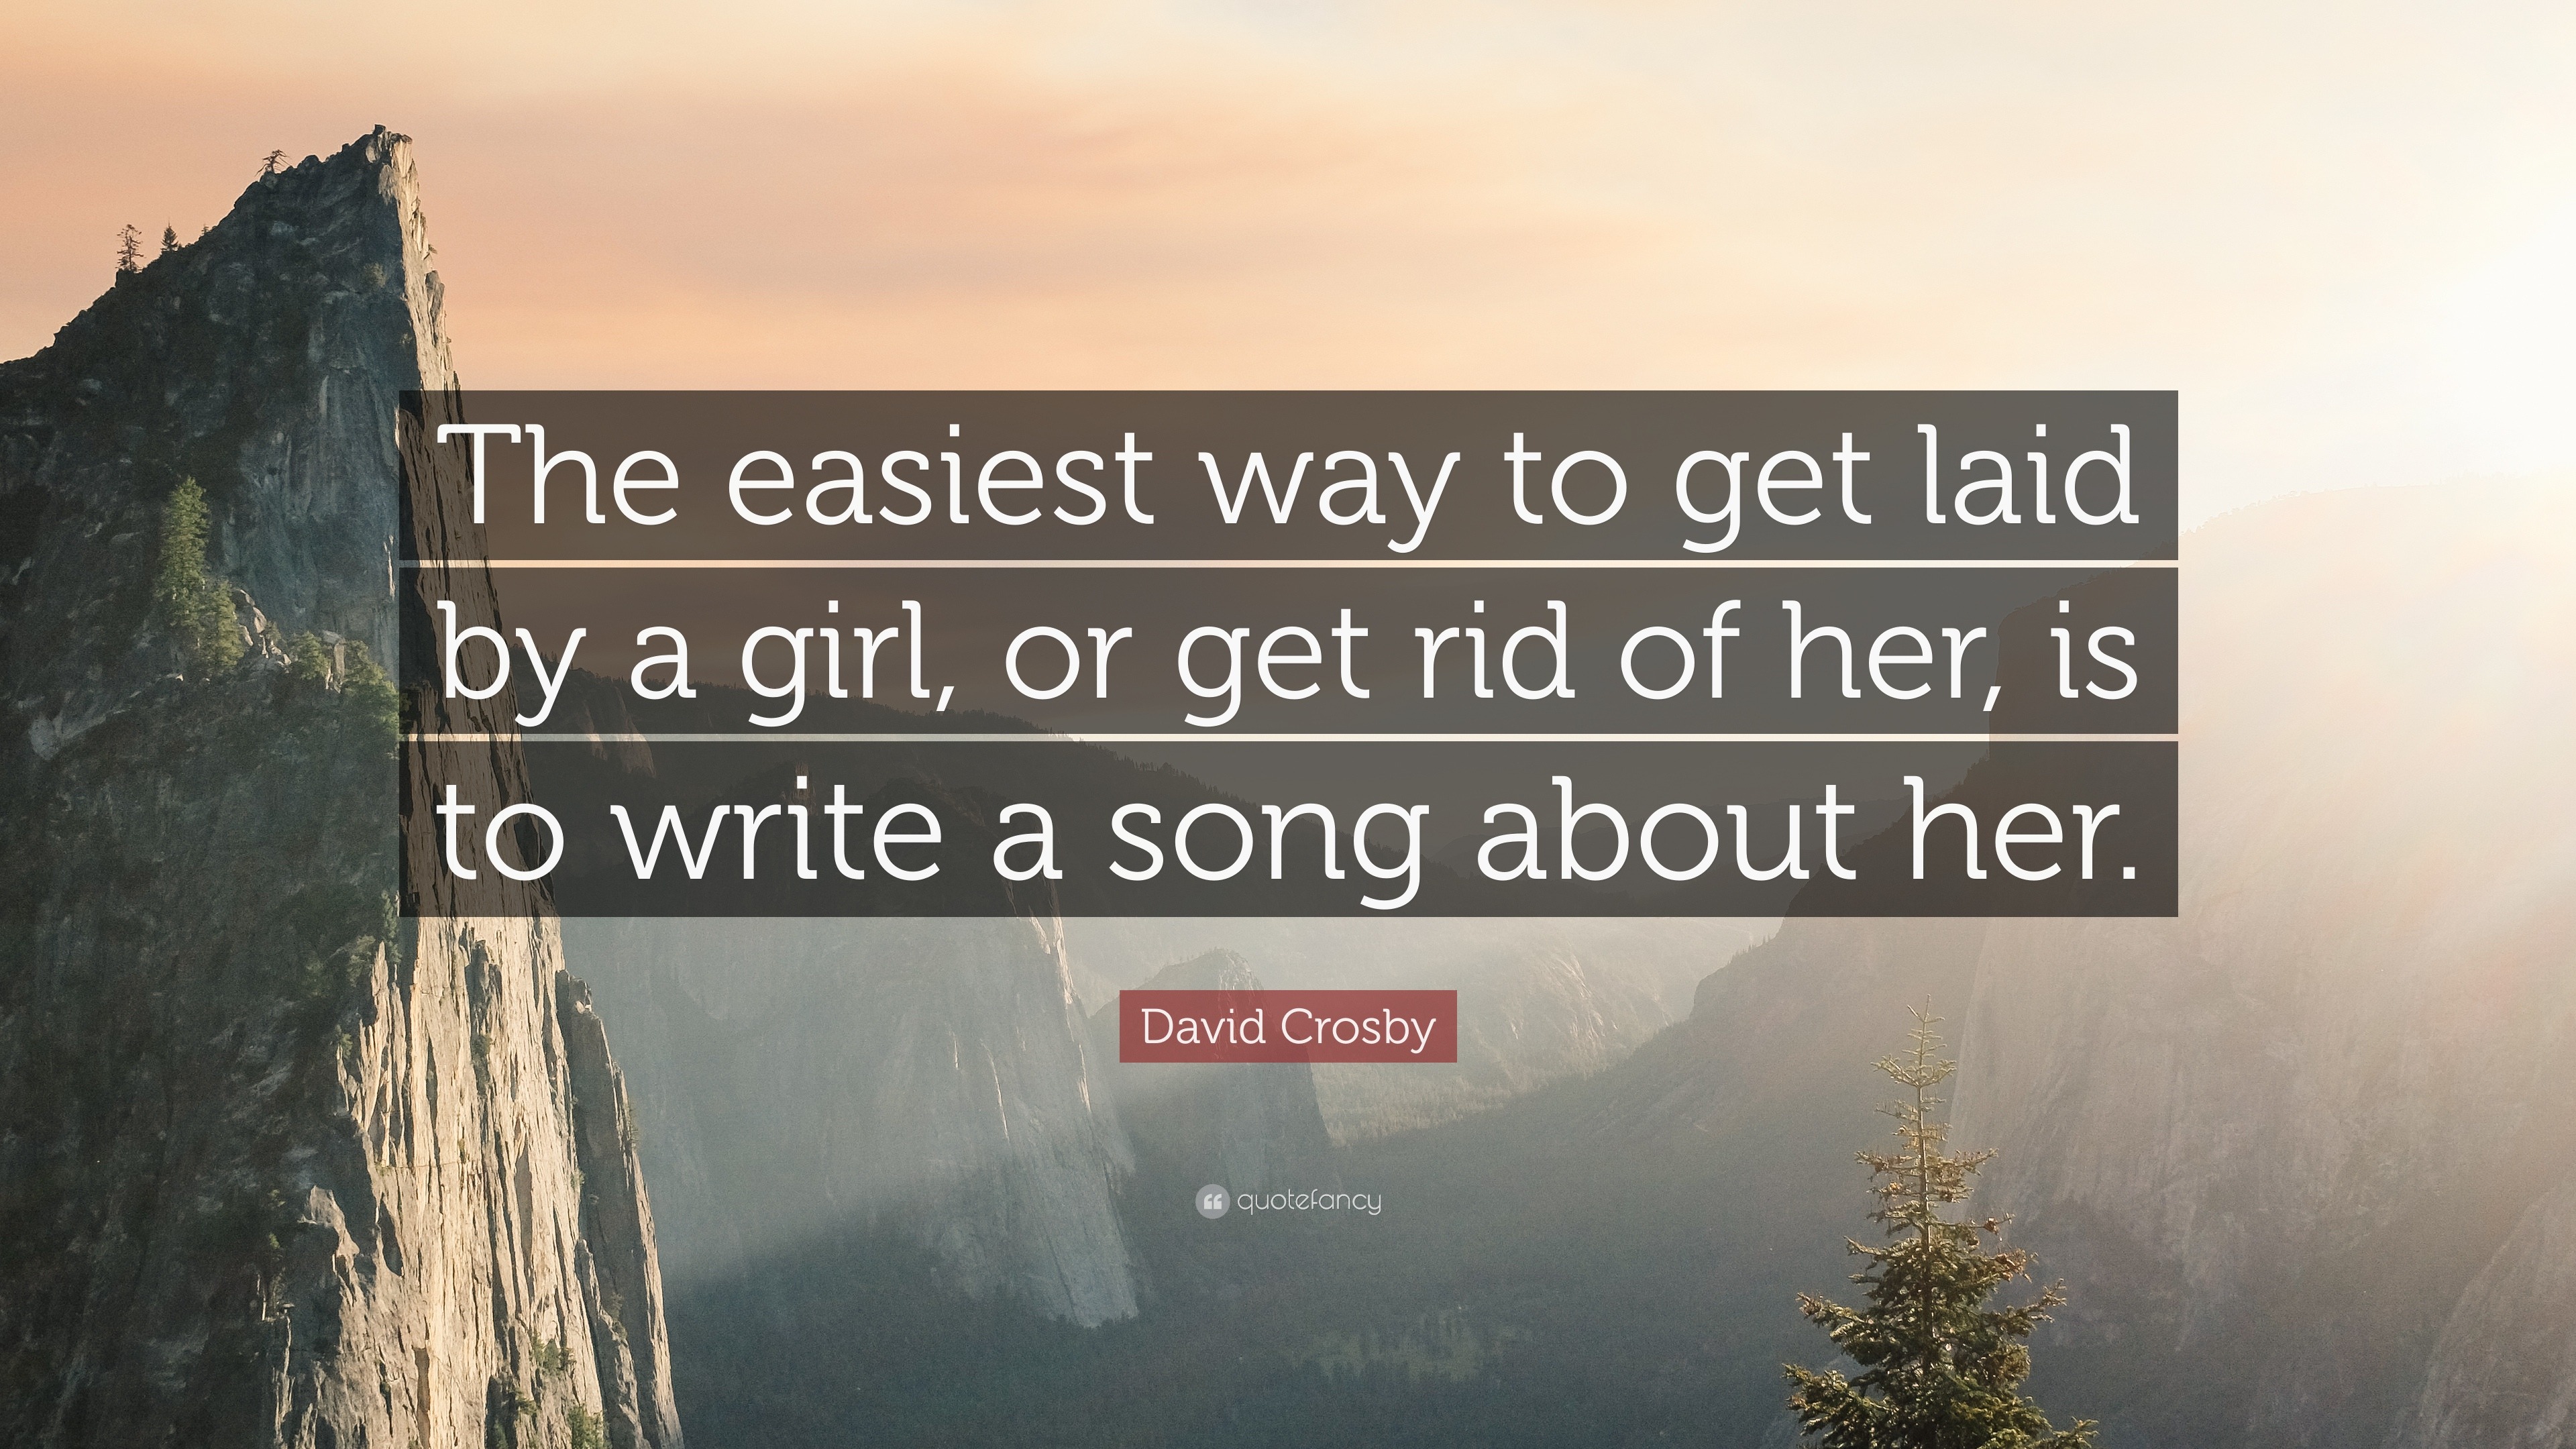 David Crosby Quote “the Easiest Way To Get Laid By A Girl Or Get Rid